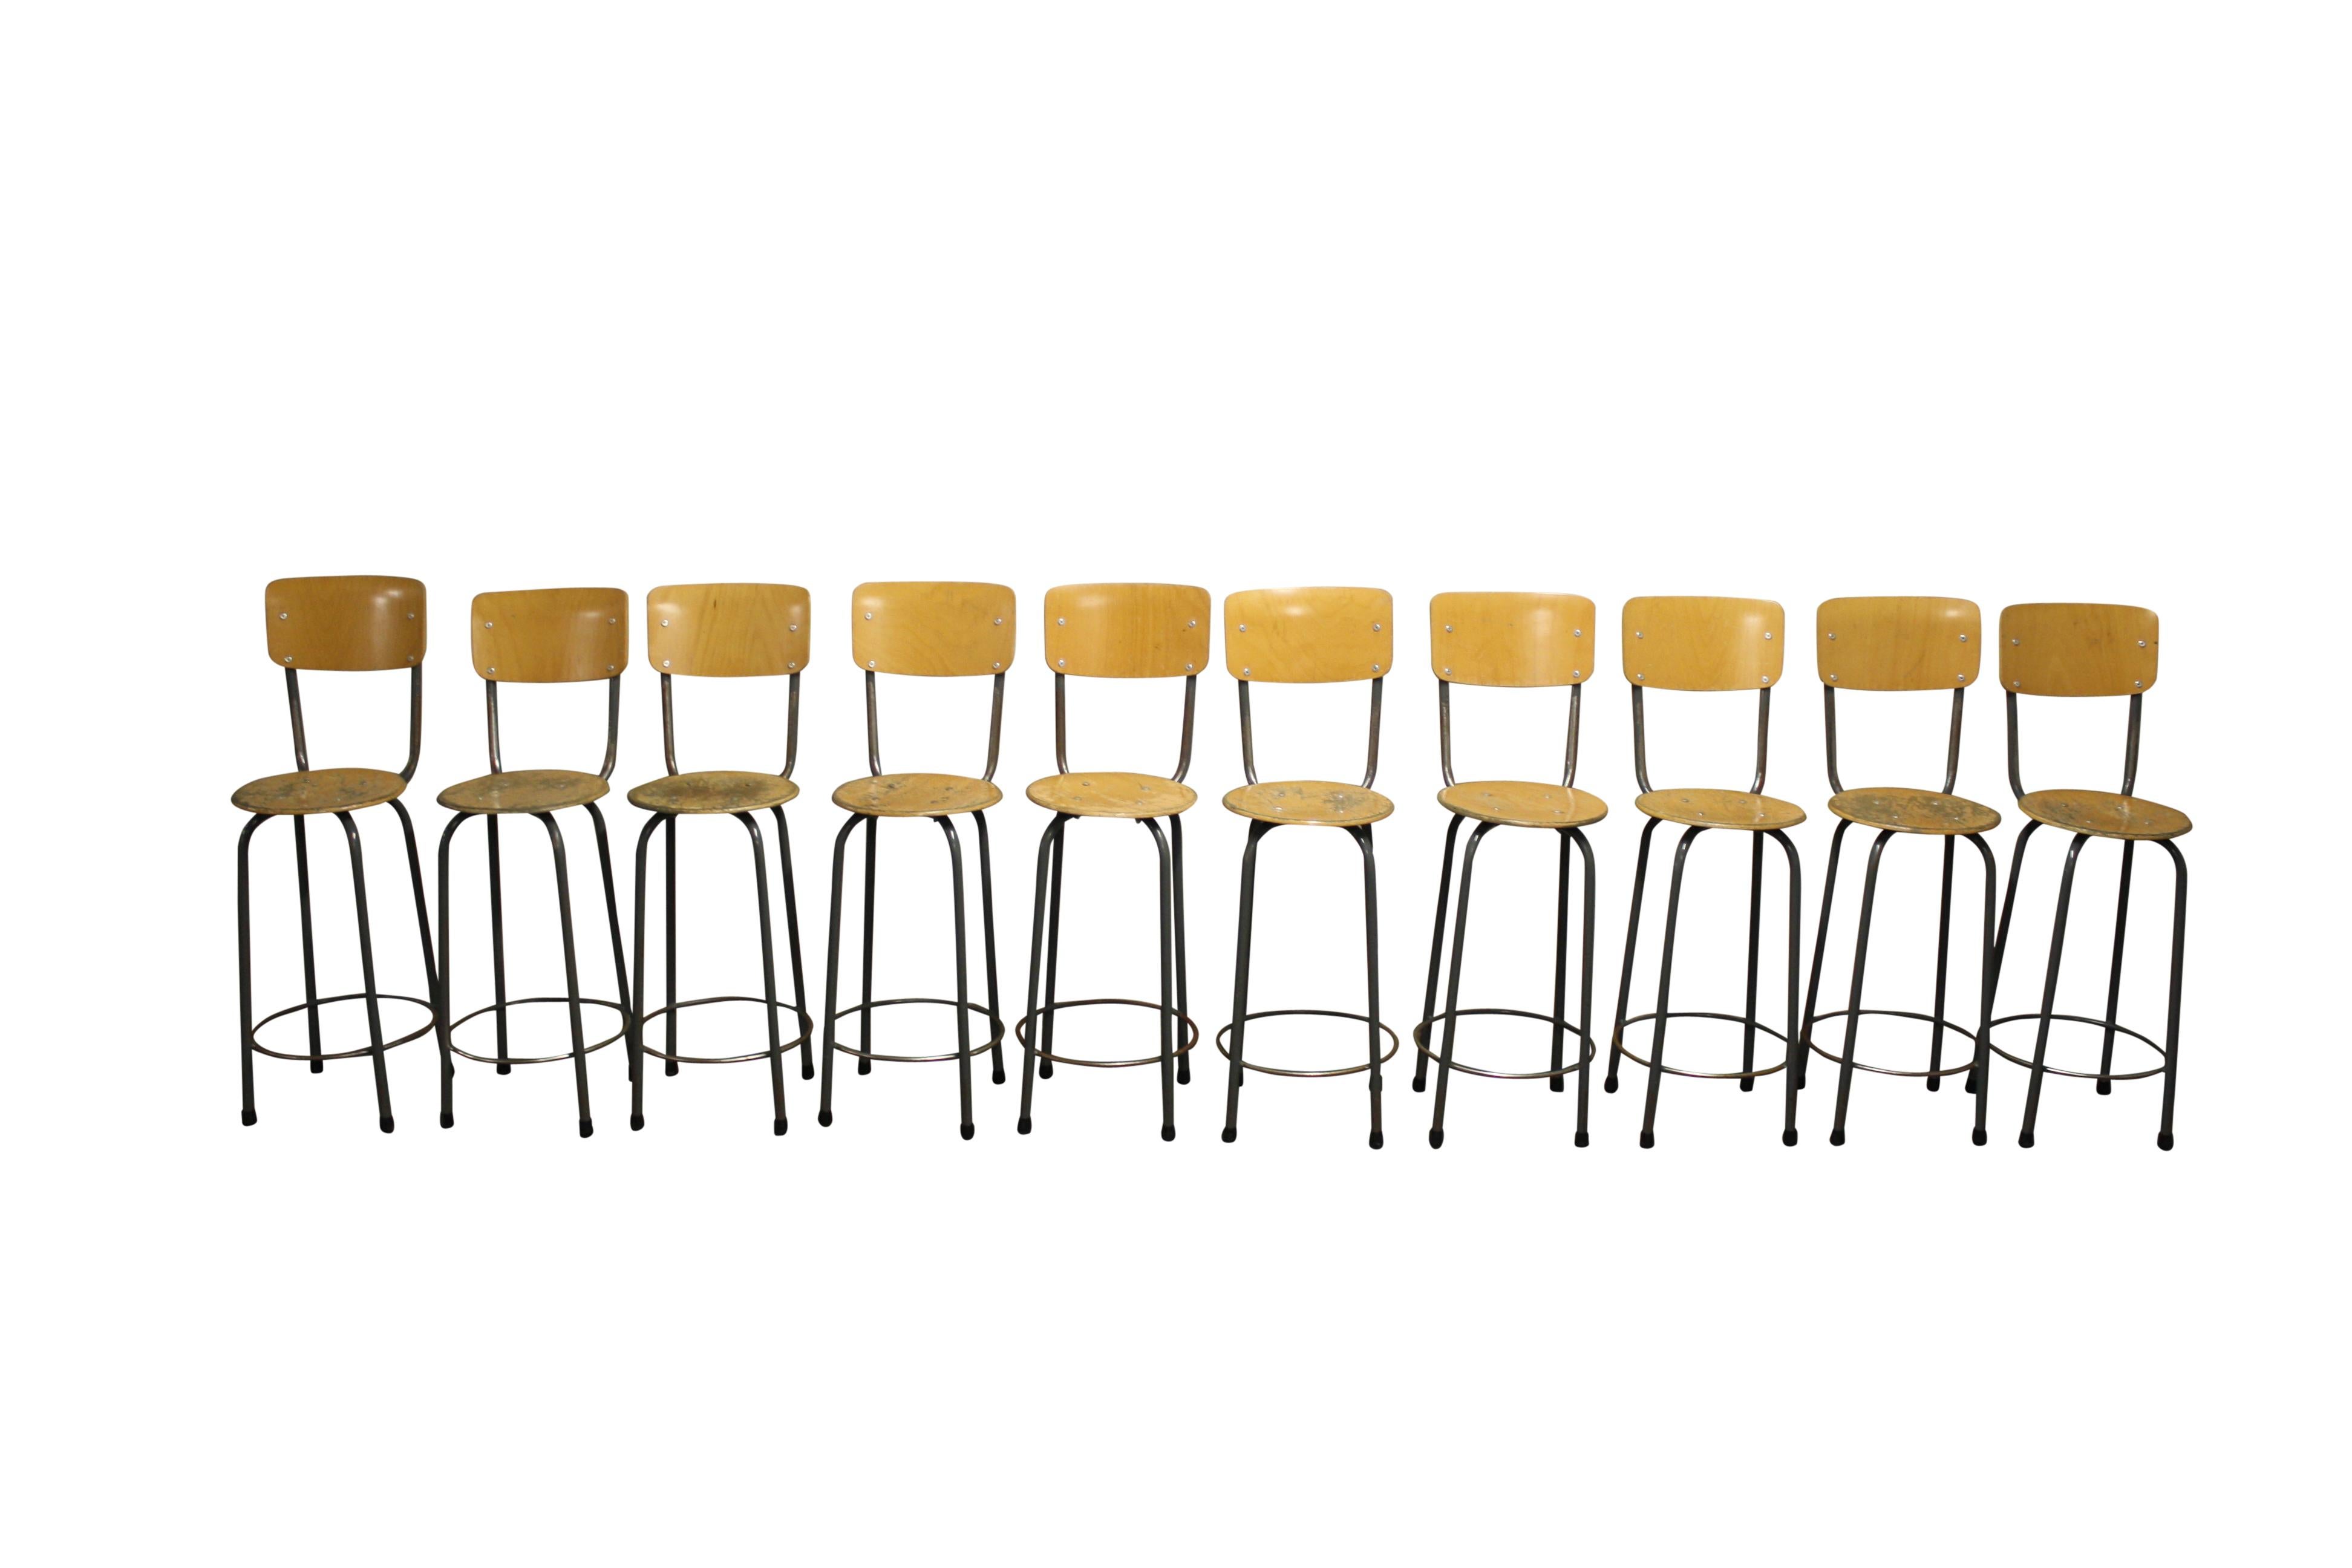 Salvaged industrial stools with a tubular steel frame and wooden seat and backrests.

The stools come from a school in wallonia (belgium) and were used as laboratory stools. 

The school opened in the late 1950s and these stools where used all